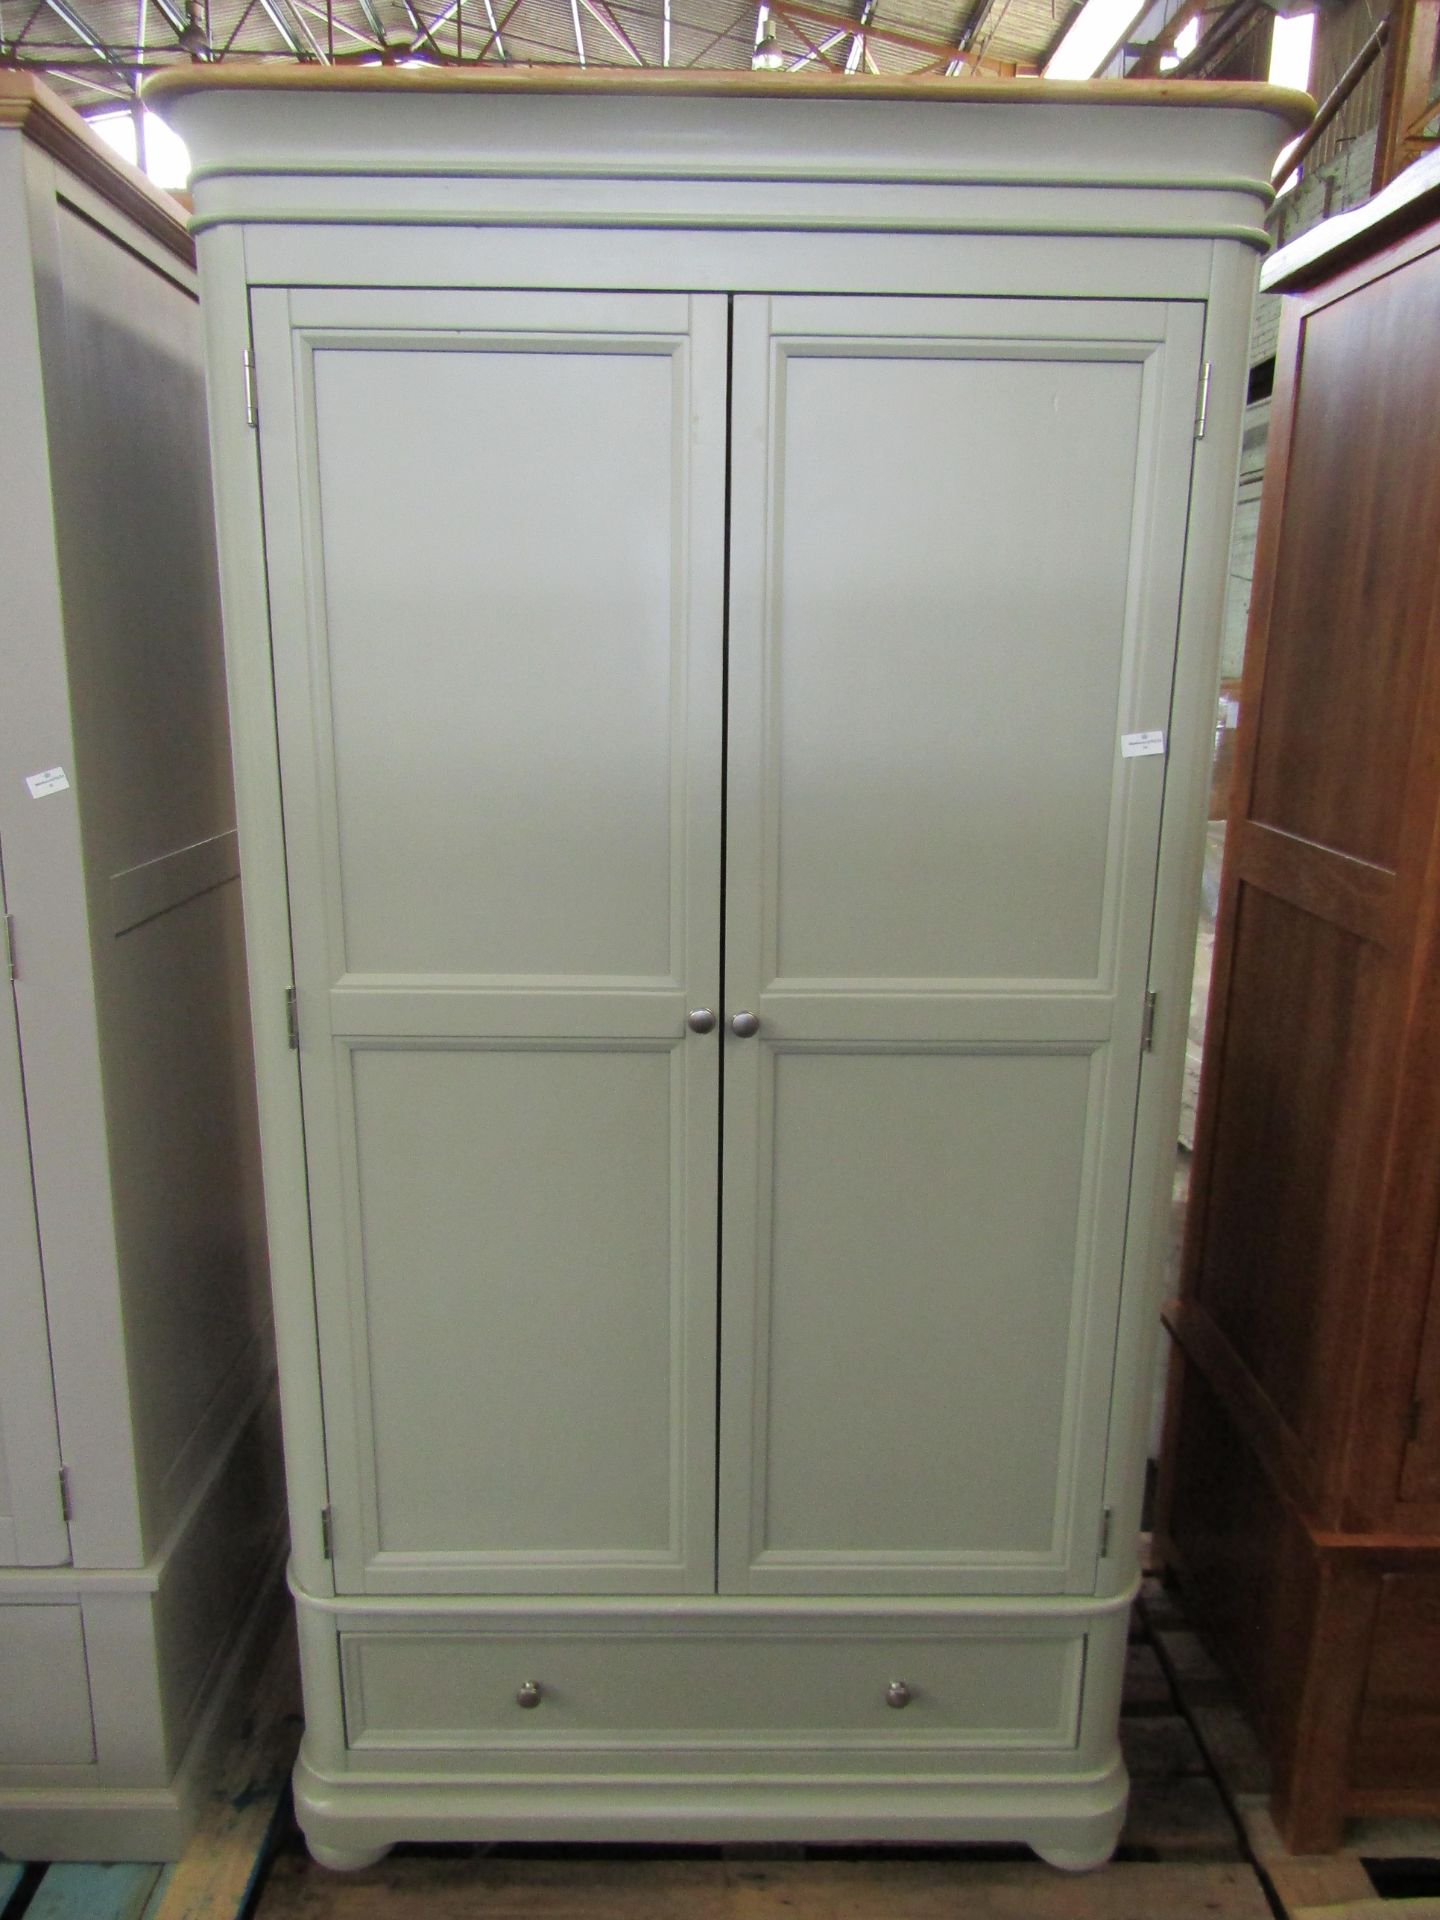 Oak Furnitureland Brindle Natural Oak And Painted Double Wardrobe RRP Â£729.99 Bring about a relaxed